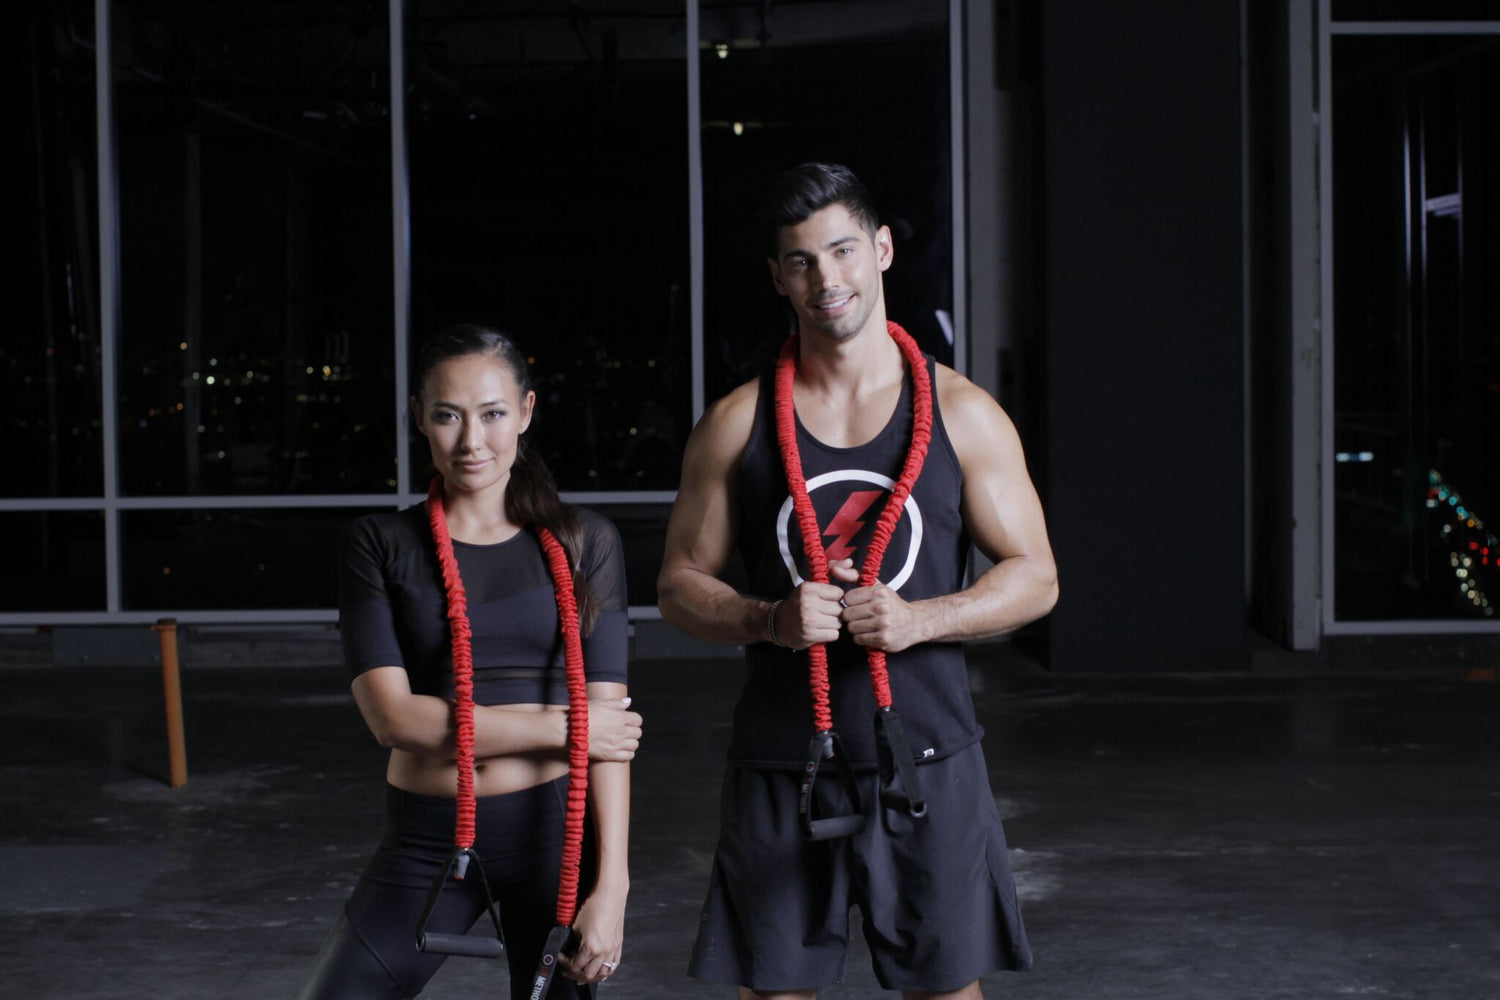 Resistance Bands Benefits: 10 Compelling Reasons for Choosing Resistance Band Training